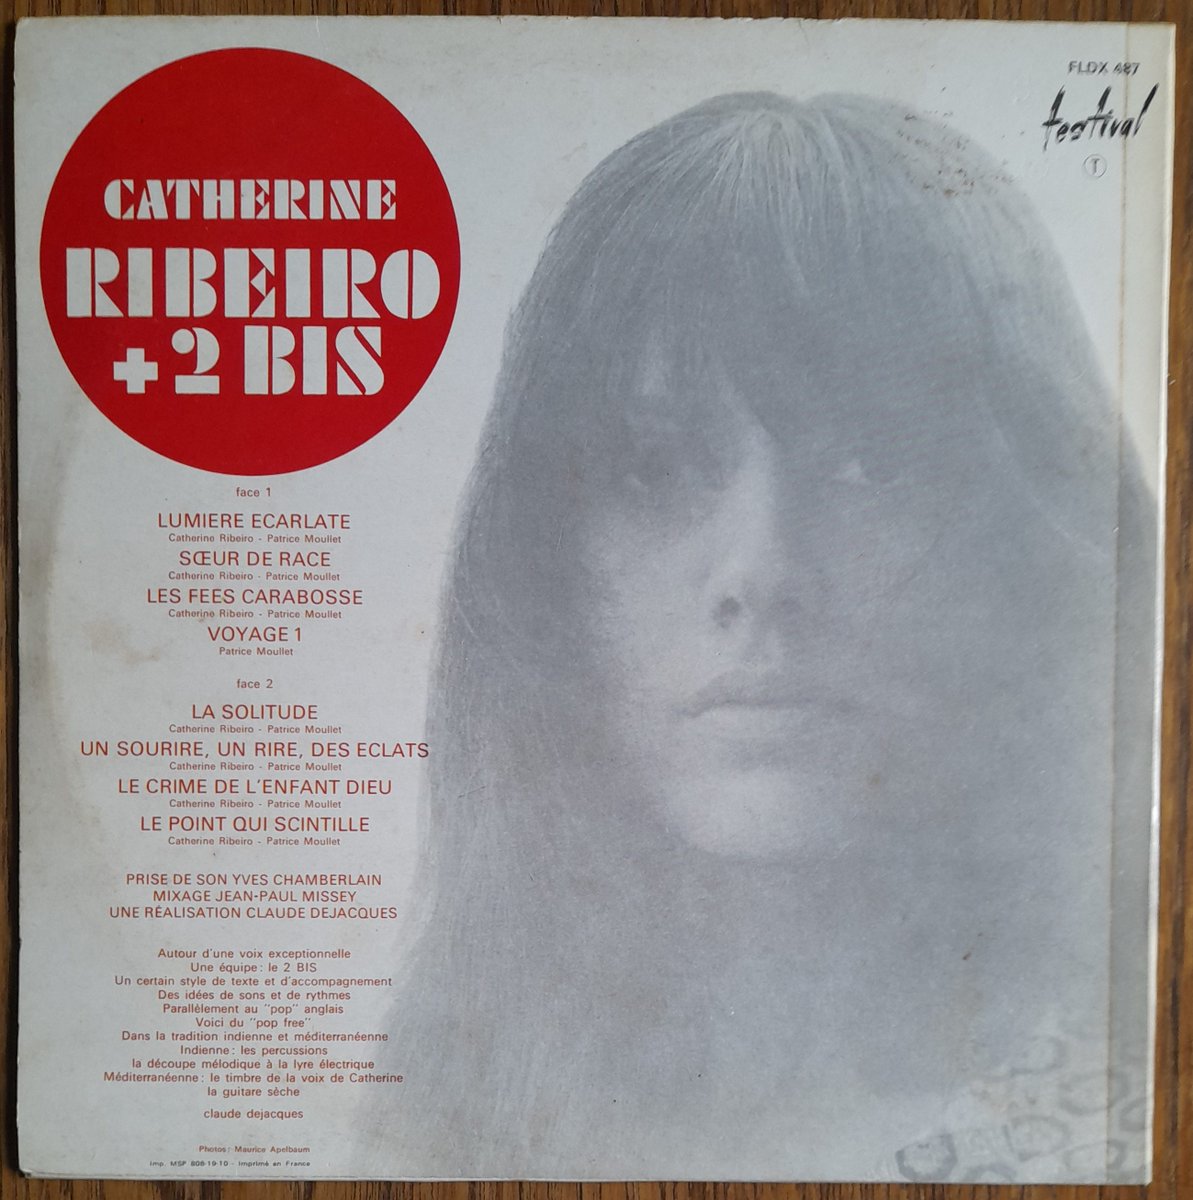 1969. “Pop Free.” “Autour d’une voix exceptionnelle” Catherine Ribeiro puts her 3 Marianne Faithfull-ish EPs behind her and moves into unknown territory with her 1st LP – the extraordinary + 2 Bis. Crucial album for France. Opening cut: youtube.com/watch?v=GVcKzo…